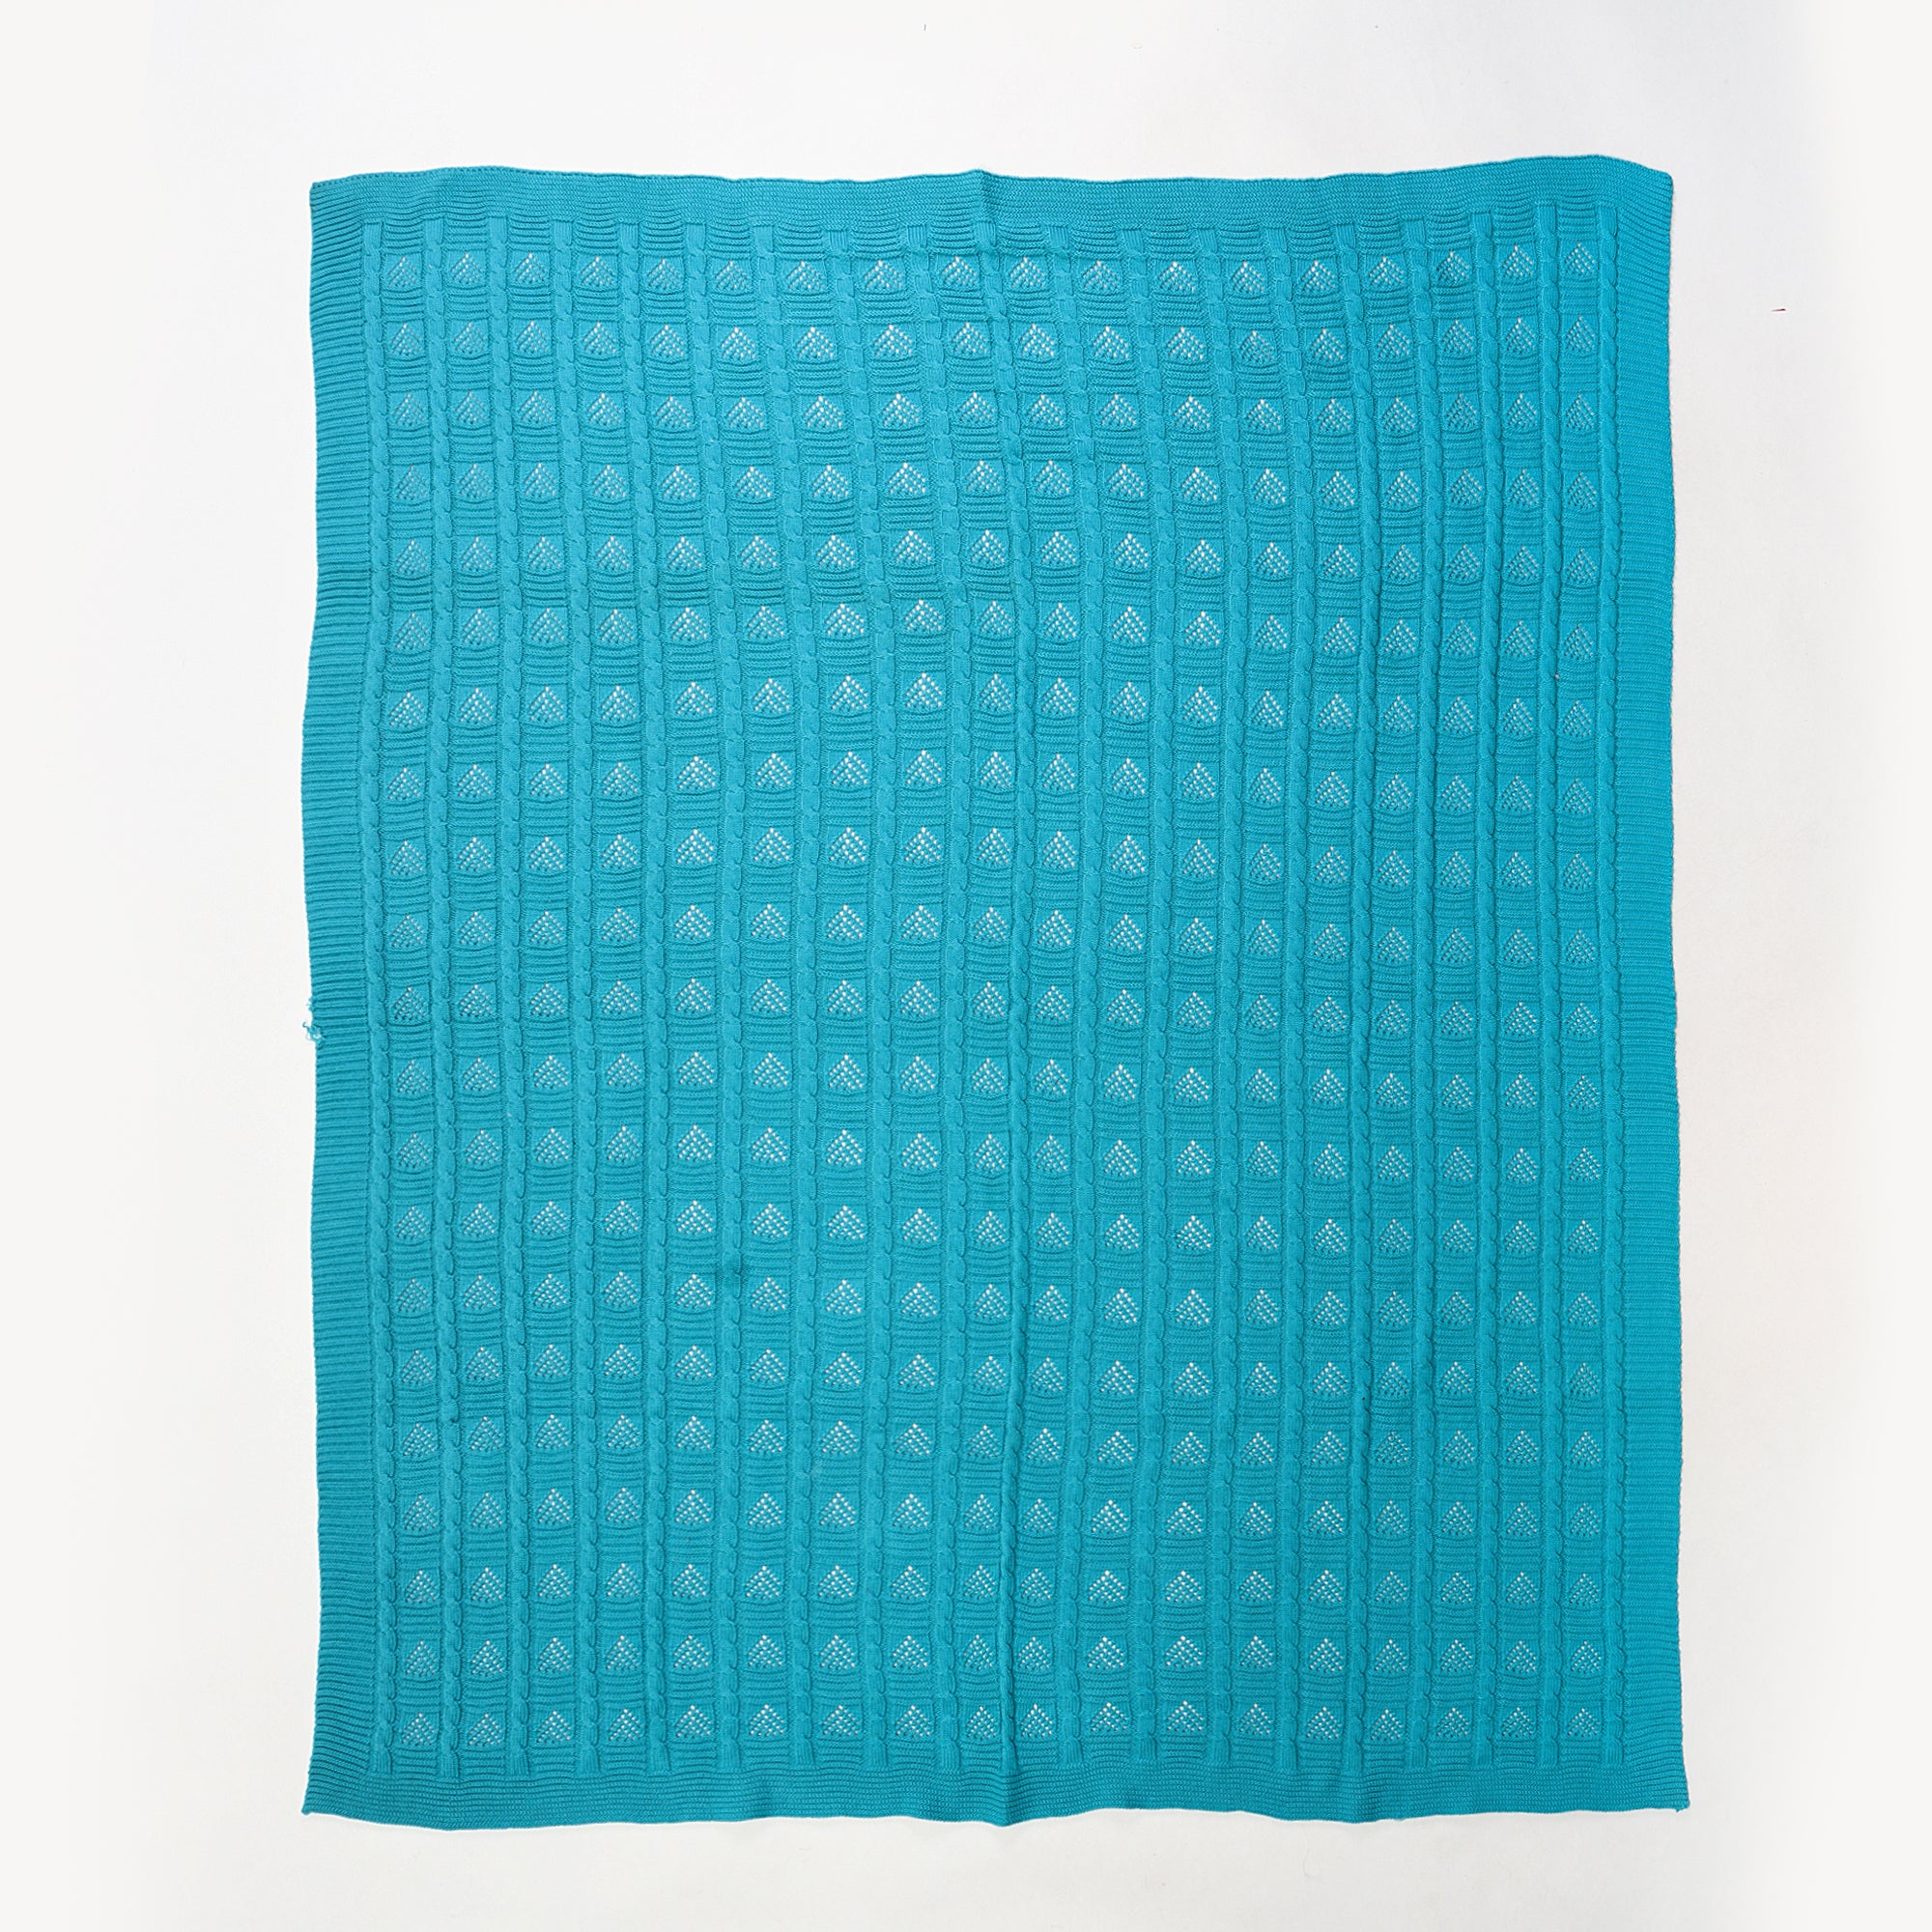 Cyan color Reversible Soft Cotton Tufted Sofa Blanket Throw